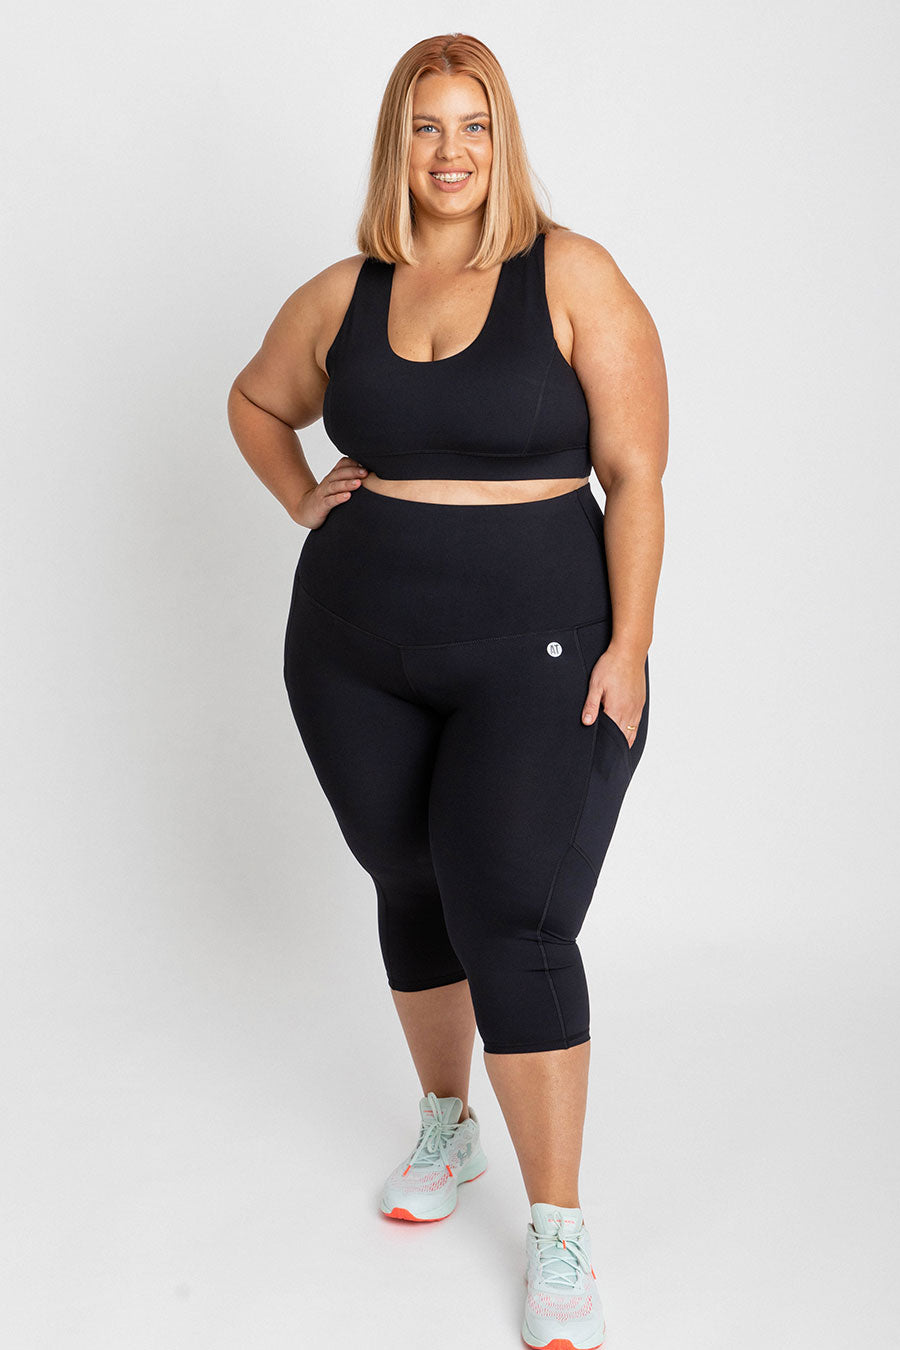 A Review Of 7 PlusSize Activewear Brands